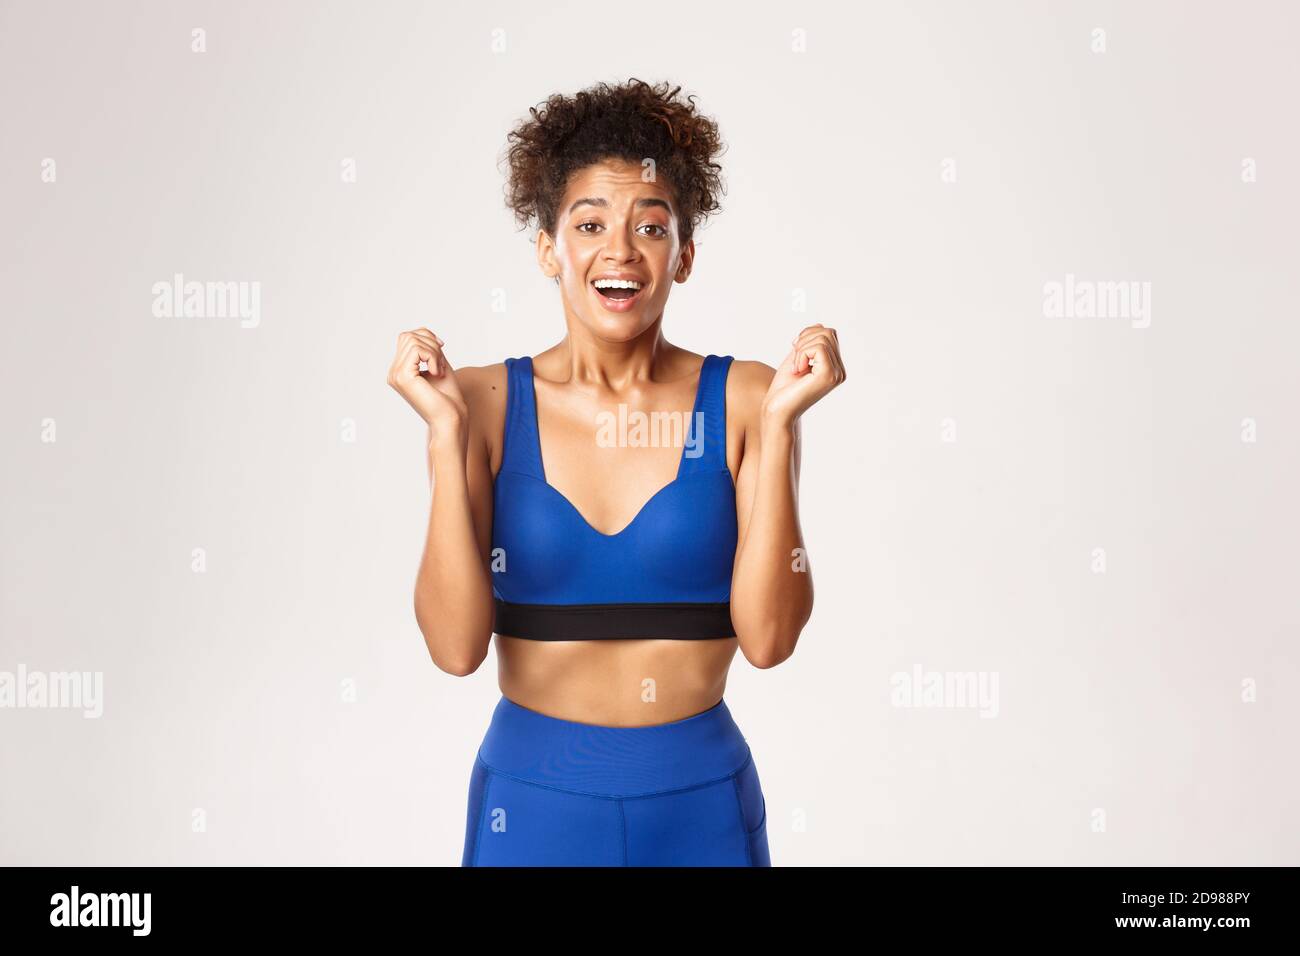 Concept of sport and workout. Excited and grateful african-american fitness woman winning, looking relieved, clenching fists delighted, achieve goal Stock Photo